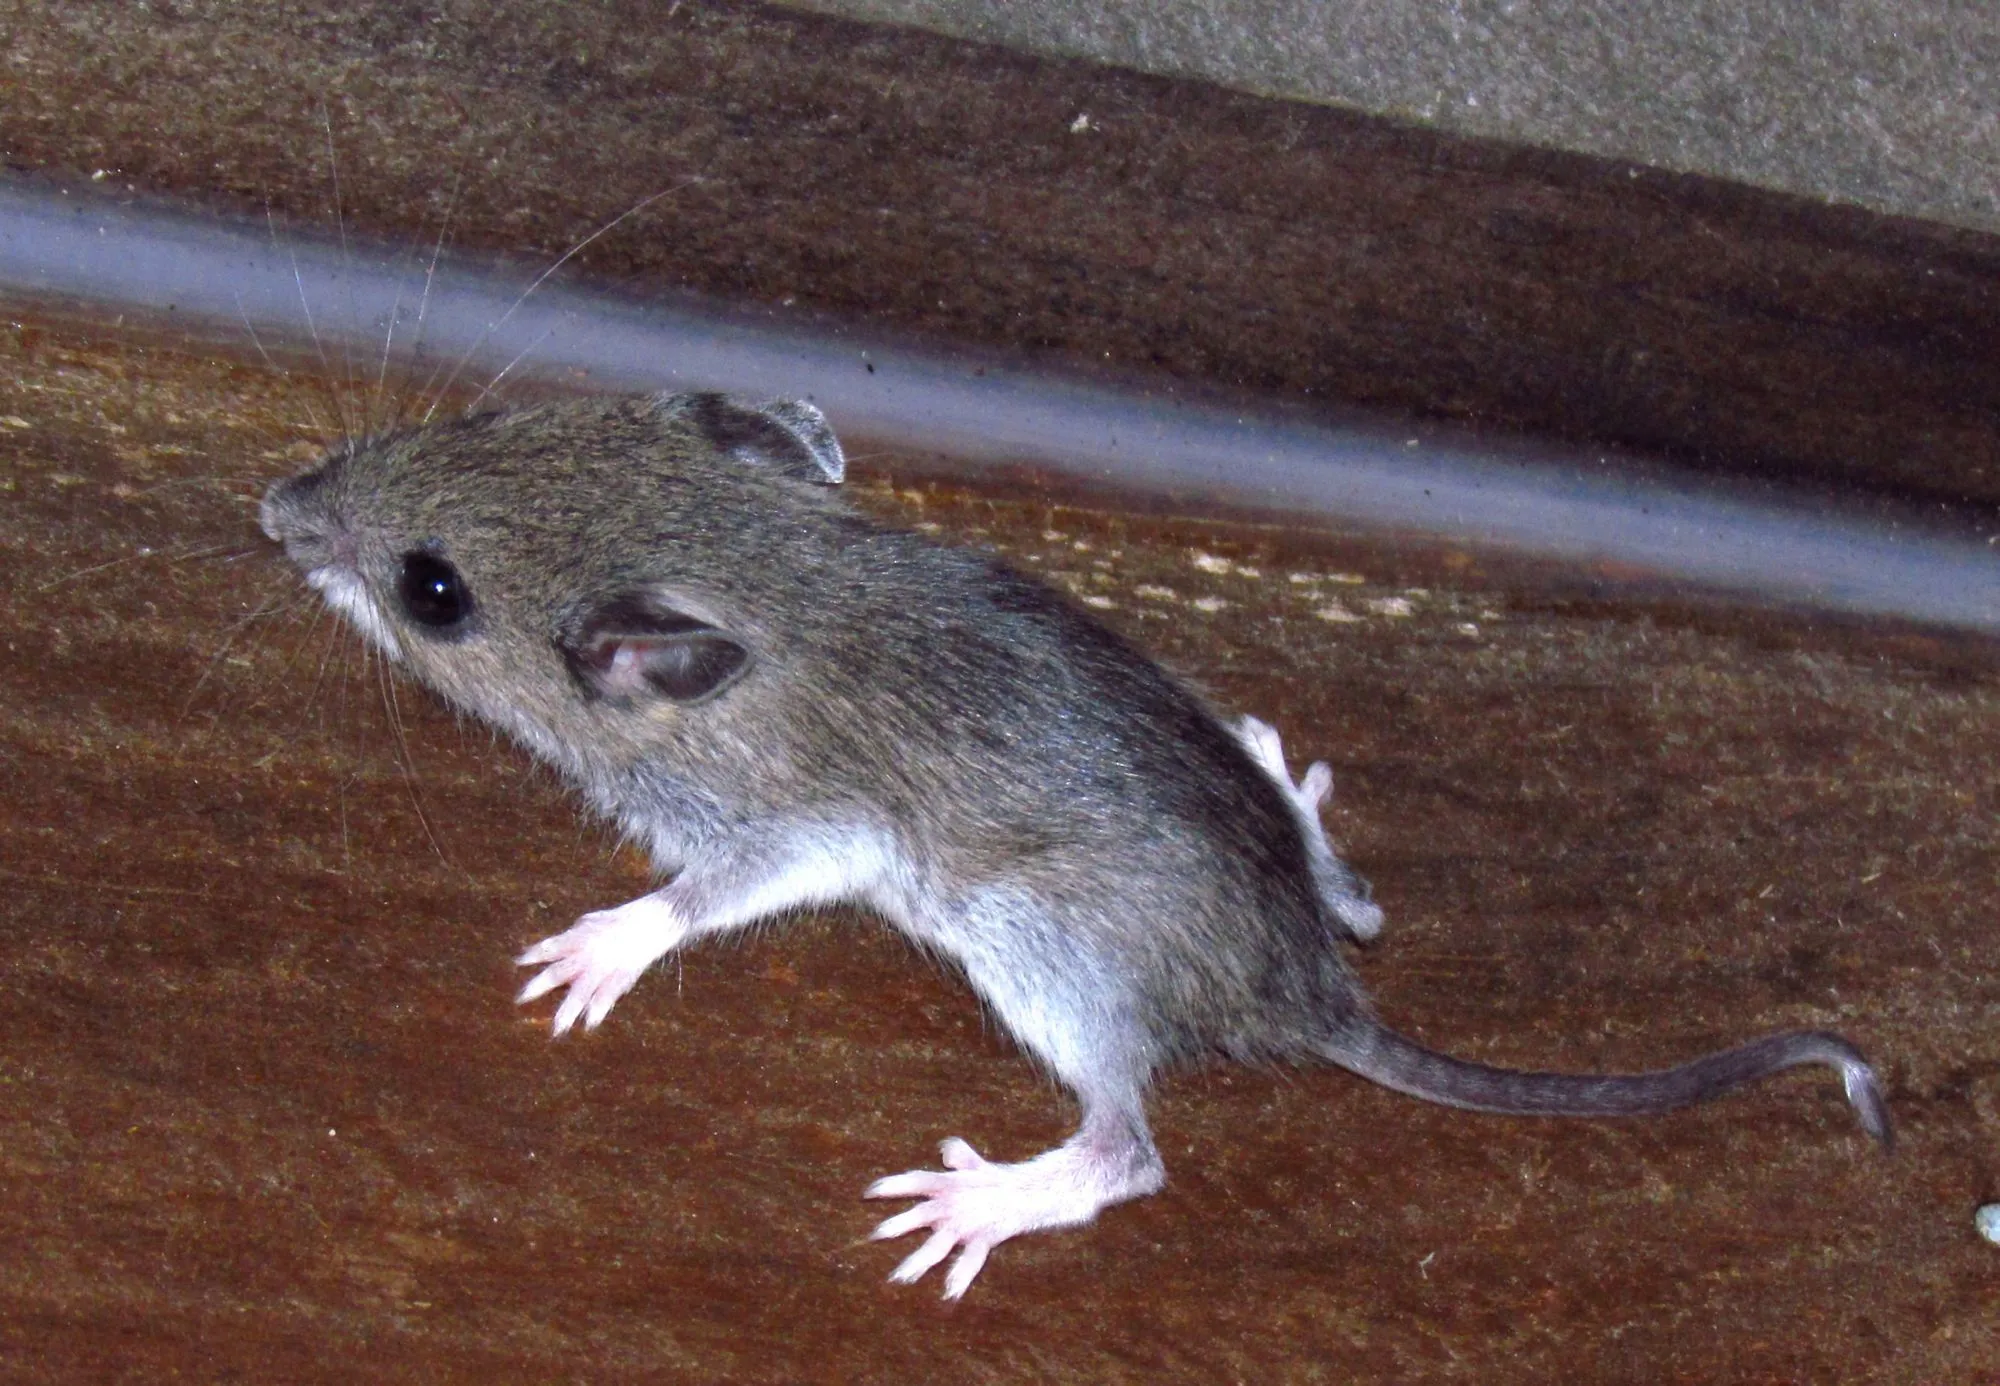 White-footed mouse facts help to learn about rodents.